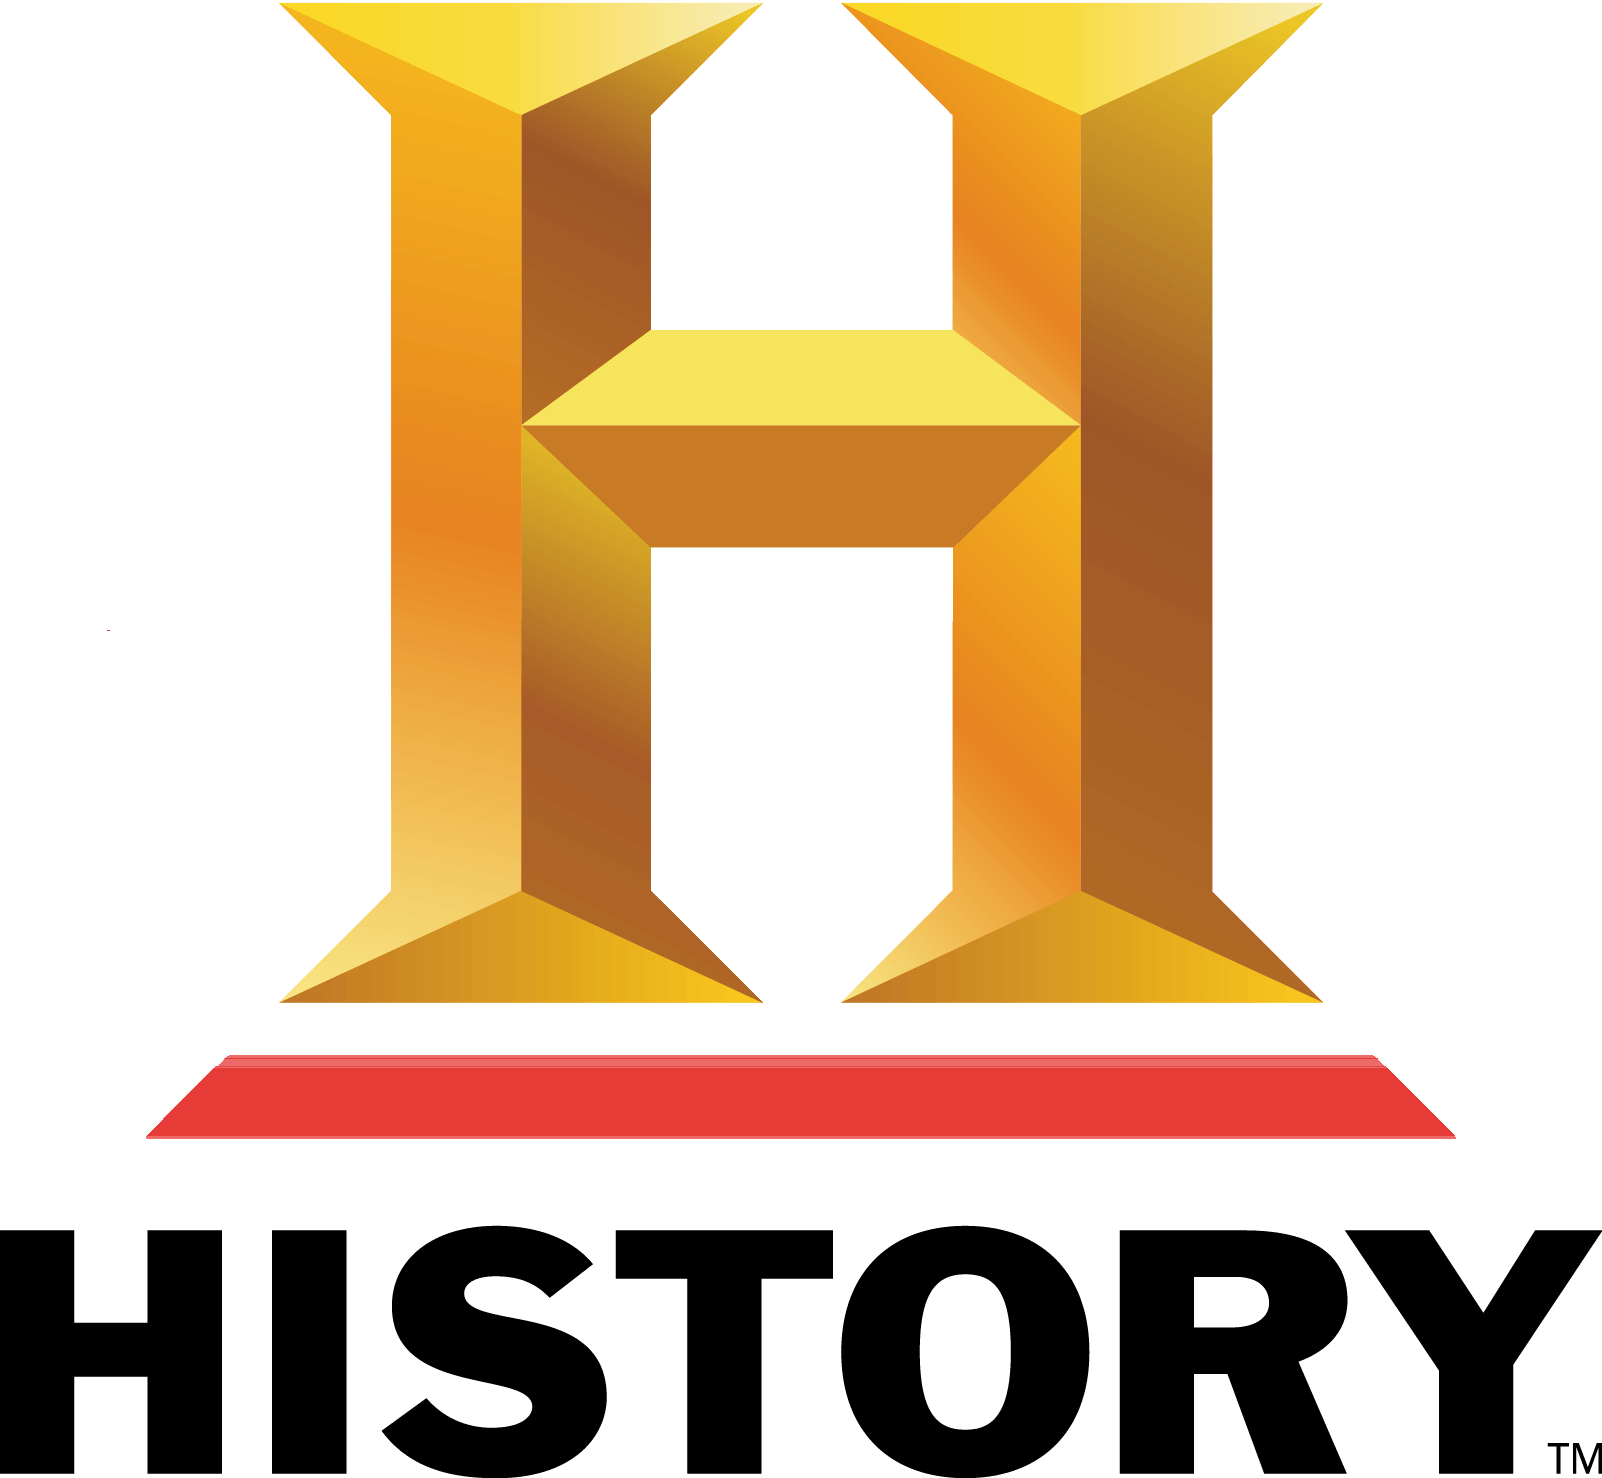 TV Channel Logo - History TV Channel Logo Free Vector Download